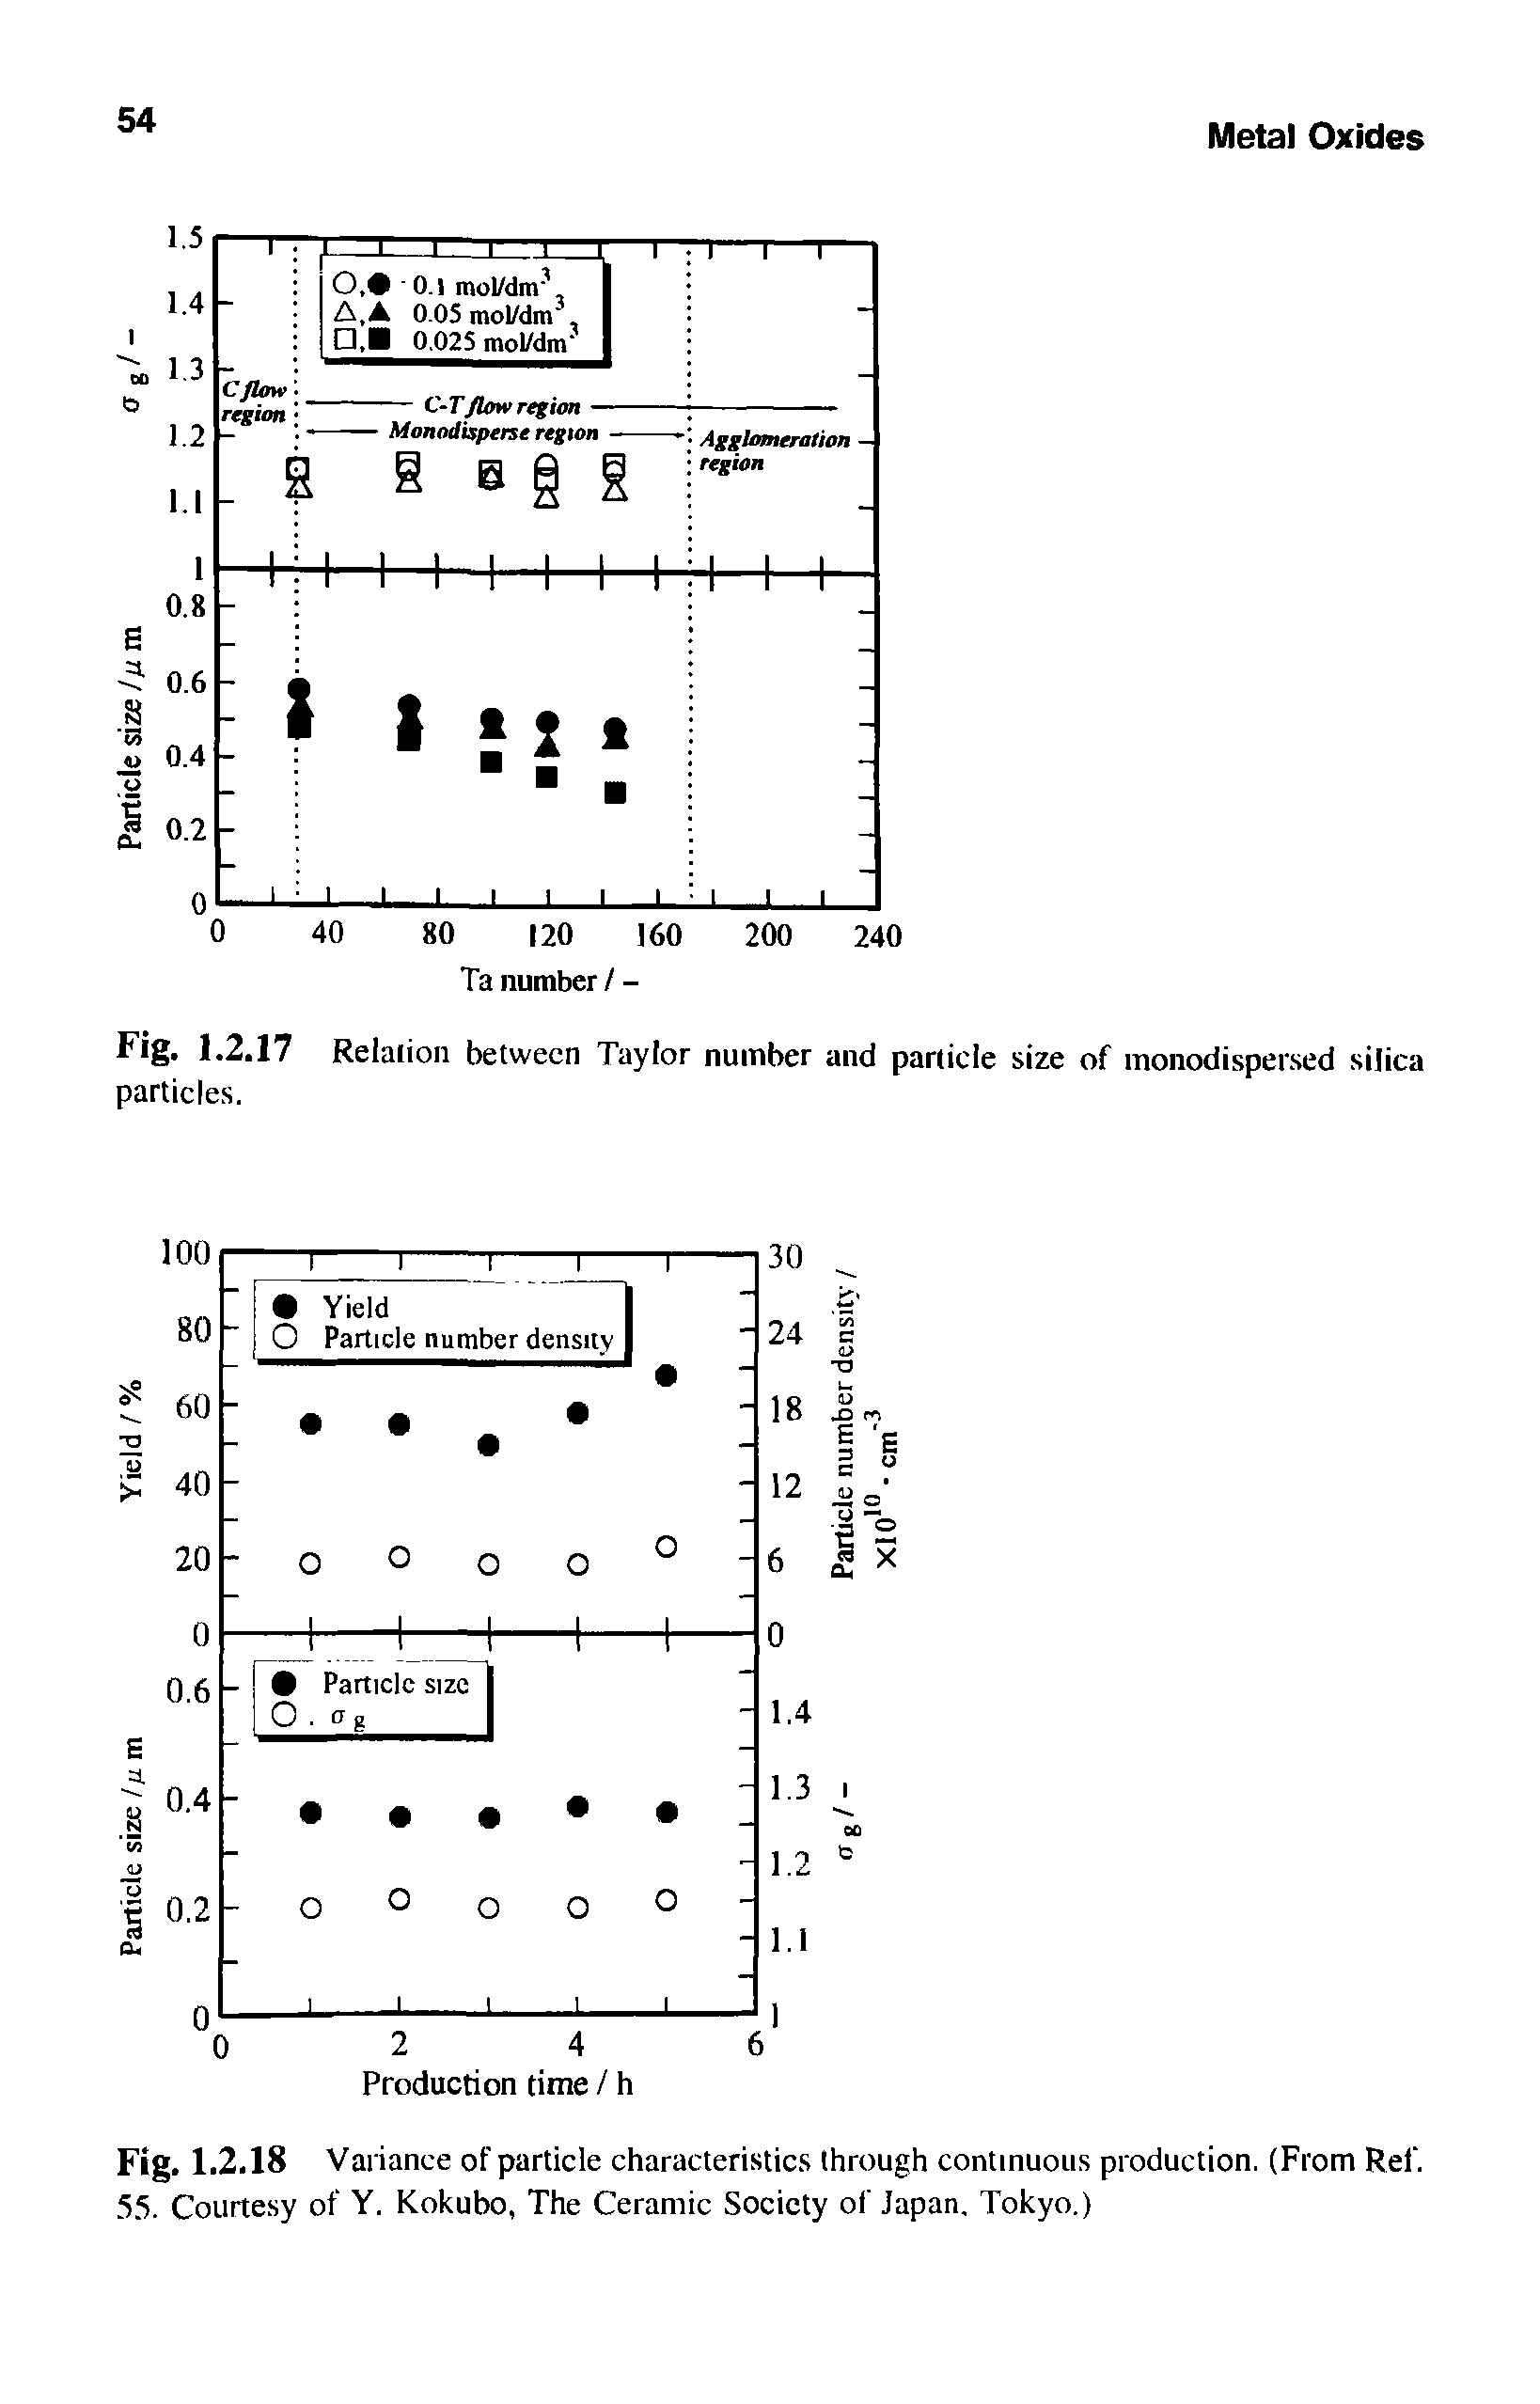 Fig. 1.2.17 Relation between Taylor number and particle size of monodispersed silica particles.